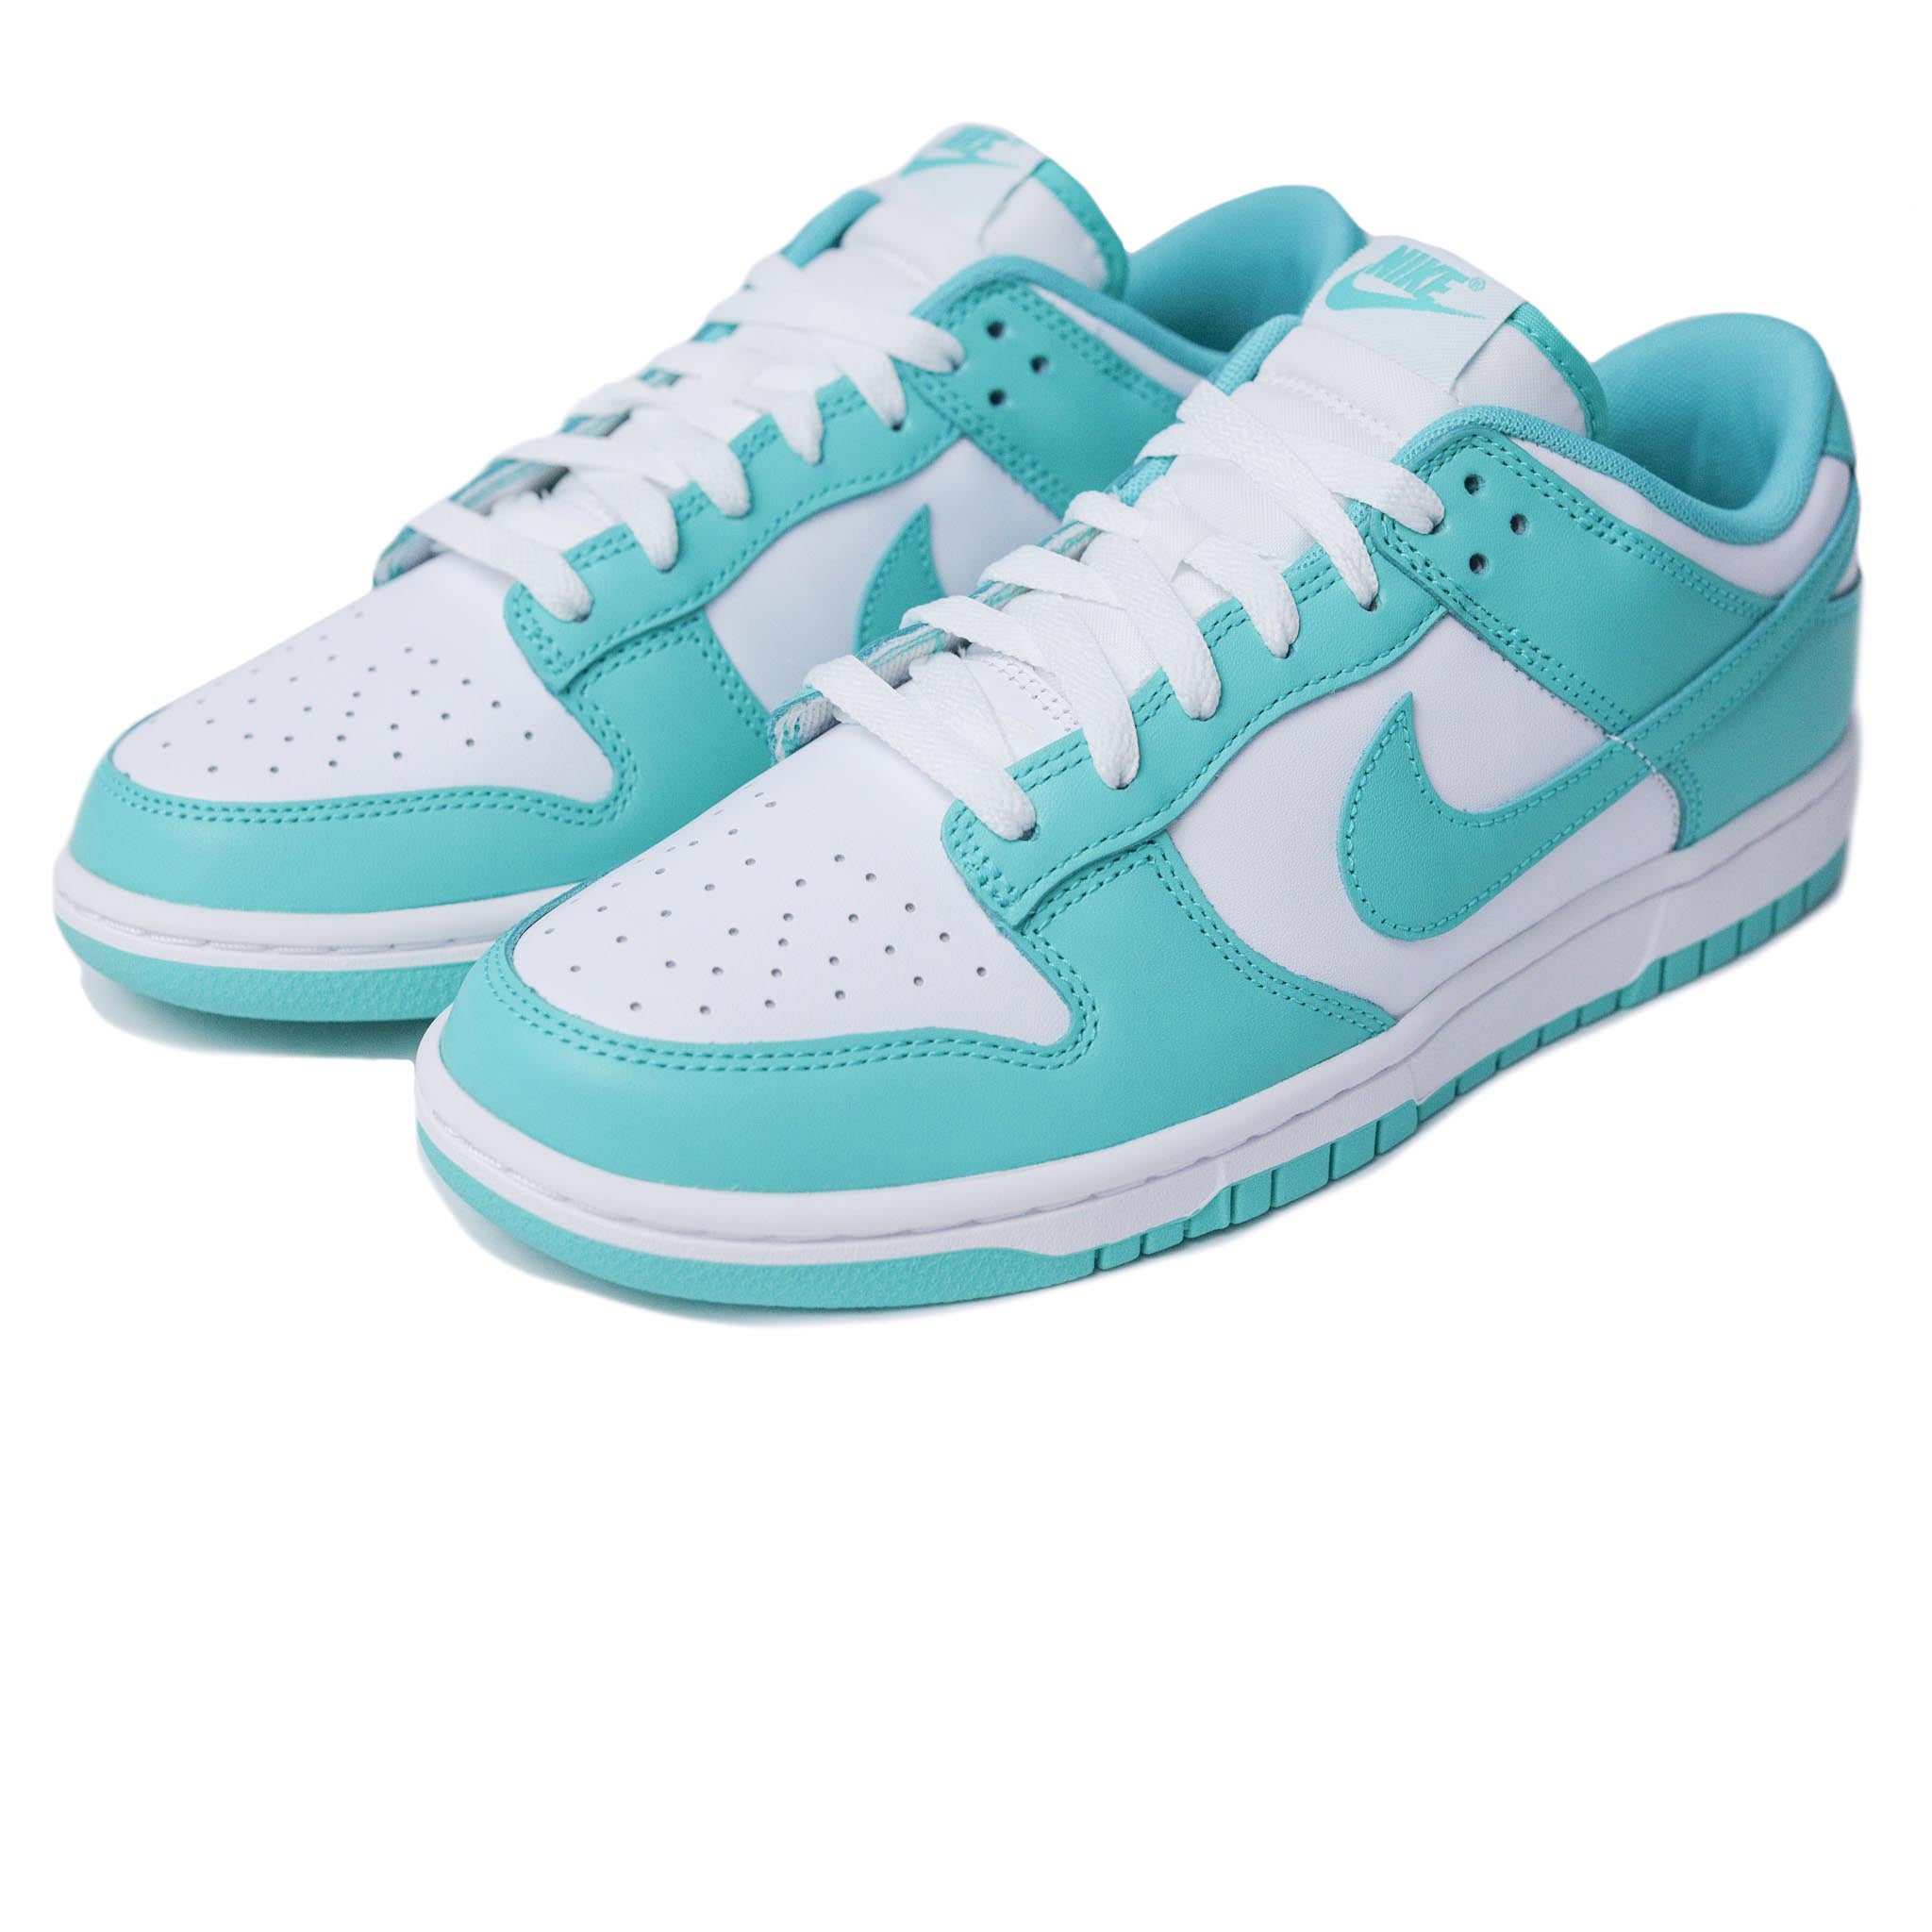 Nike Dunk Low Retro BTTYS 'Clear Jade'